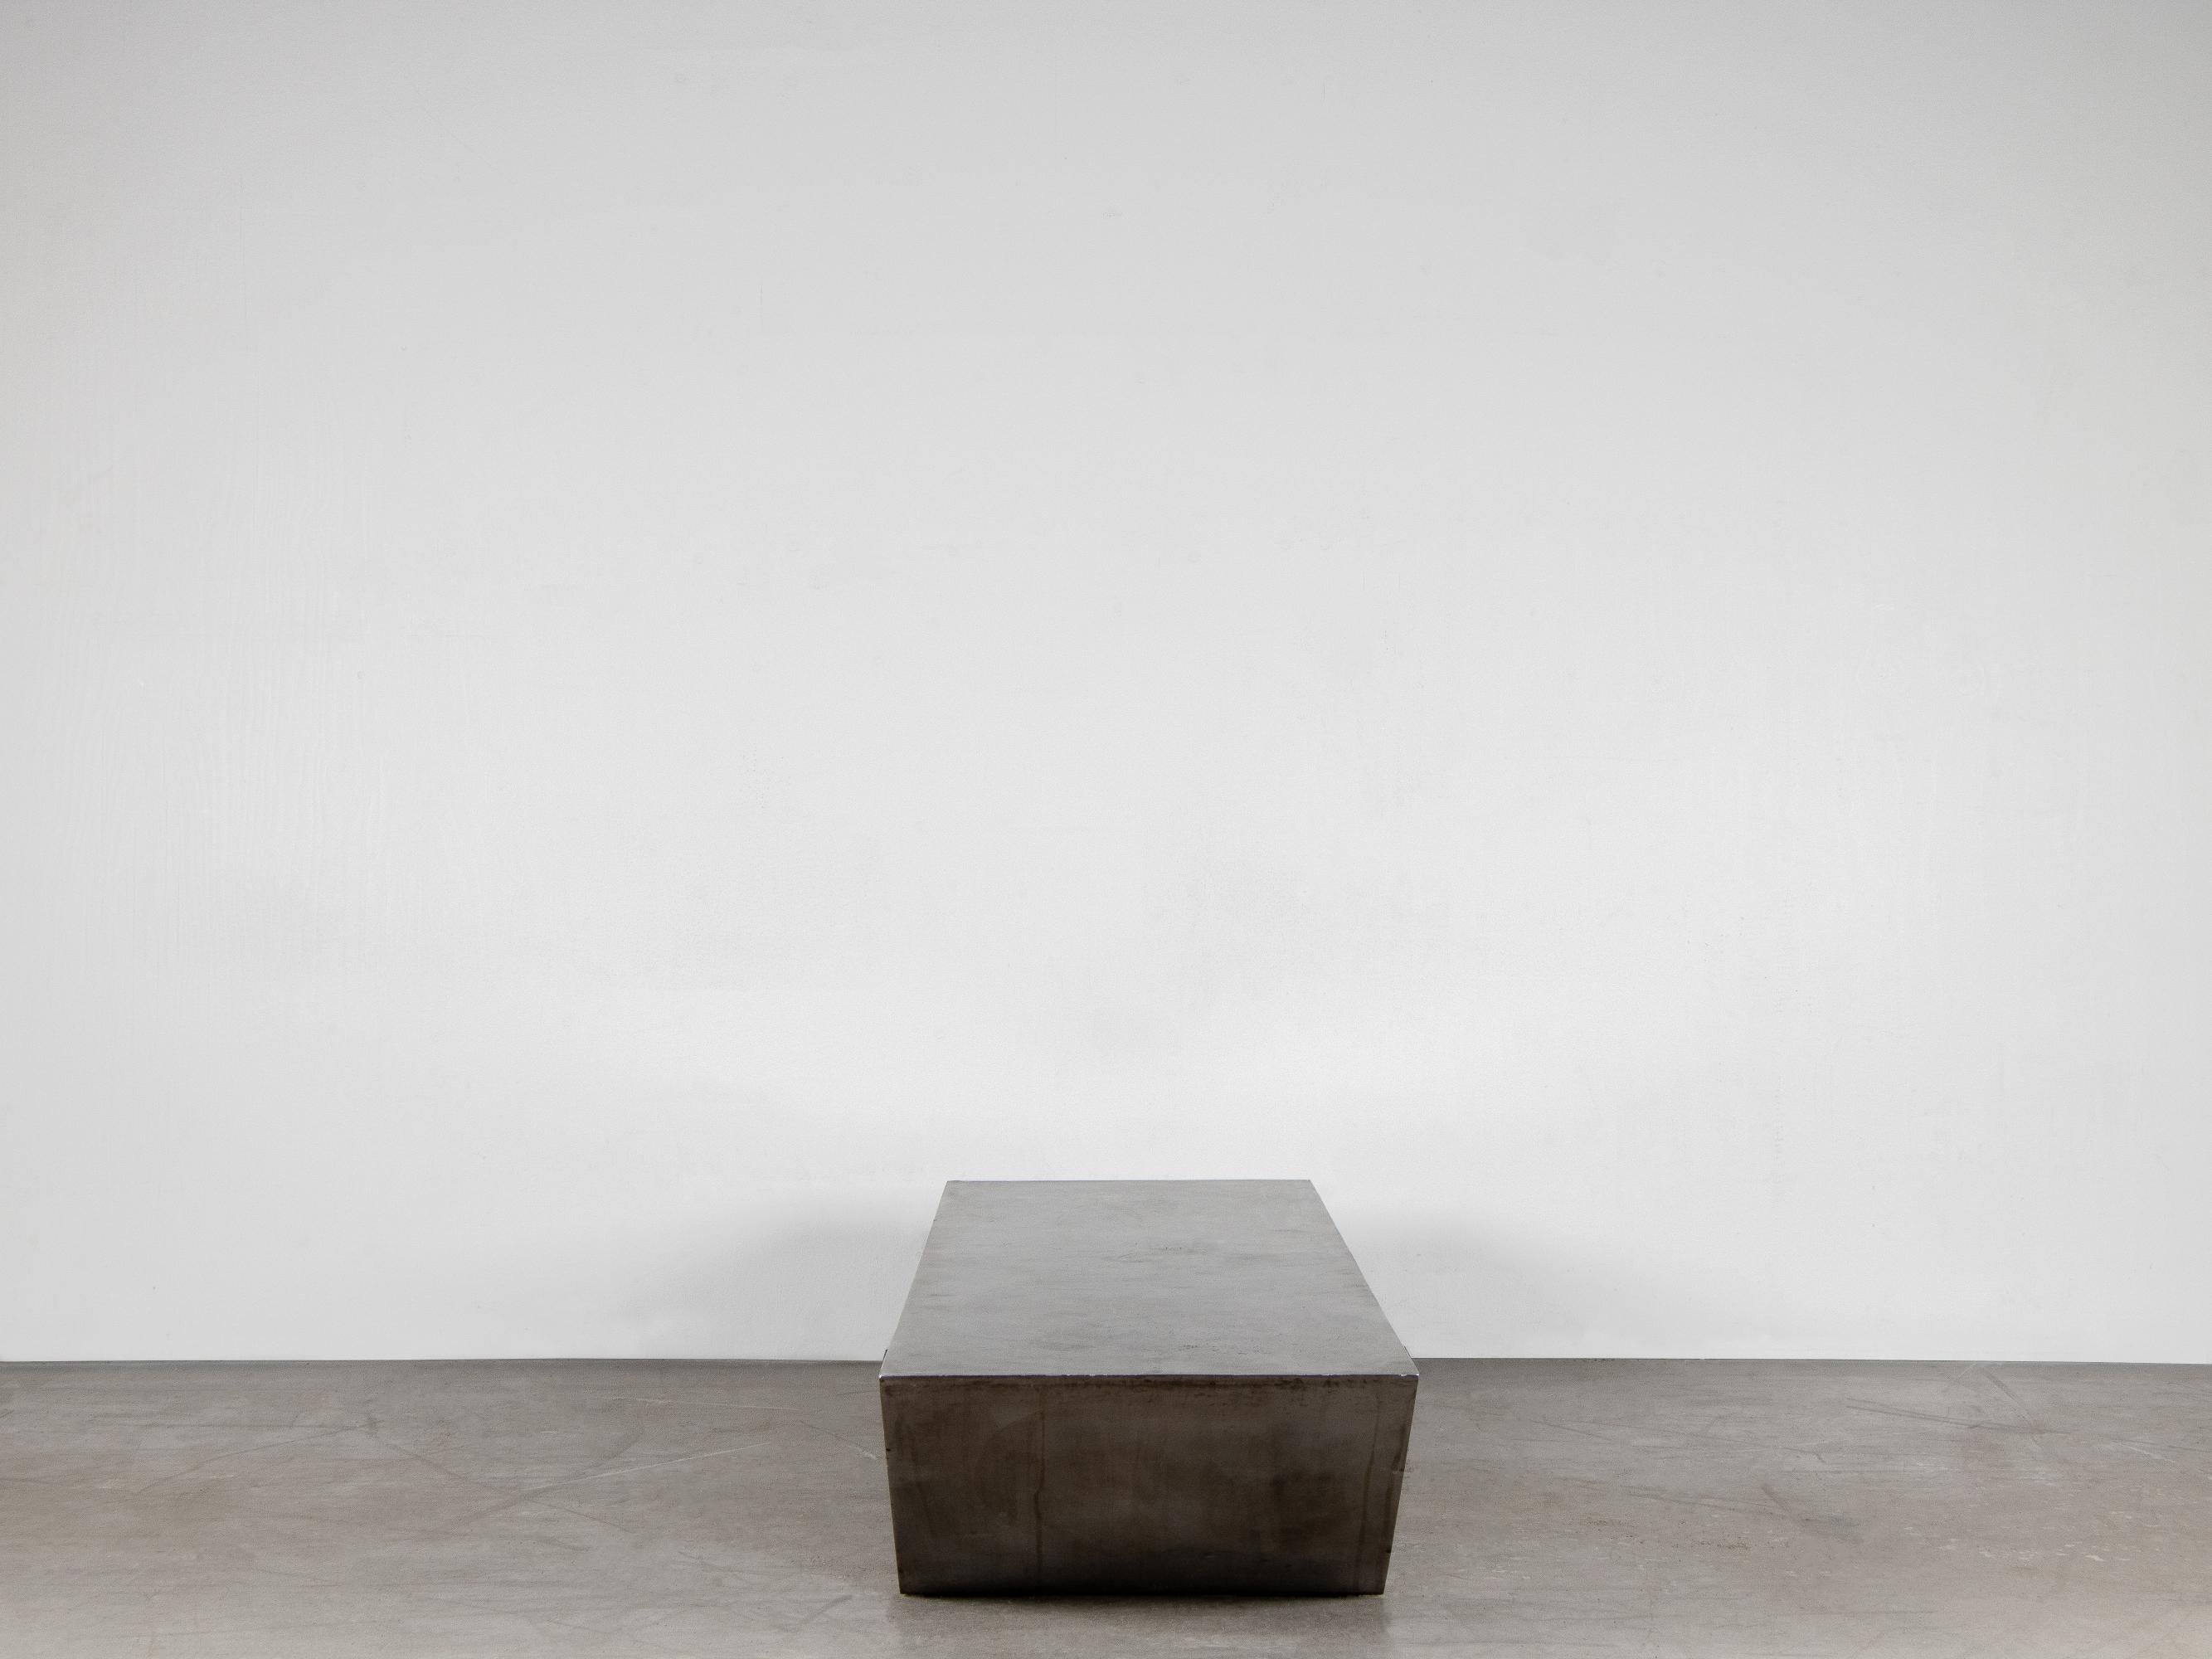 UDD sofa table by Lucas Morten
2019
Limited edition of 27
Dimensions: L 170, W 45, H 27 cm
Material: anodize the aluminum by hand which enabled the more organic faint pattern.

During a visit to the Jewish museum in New York City, Lucas Morten